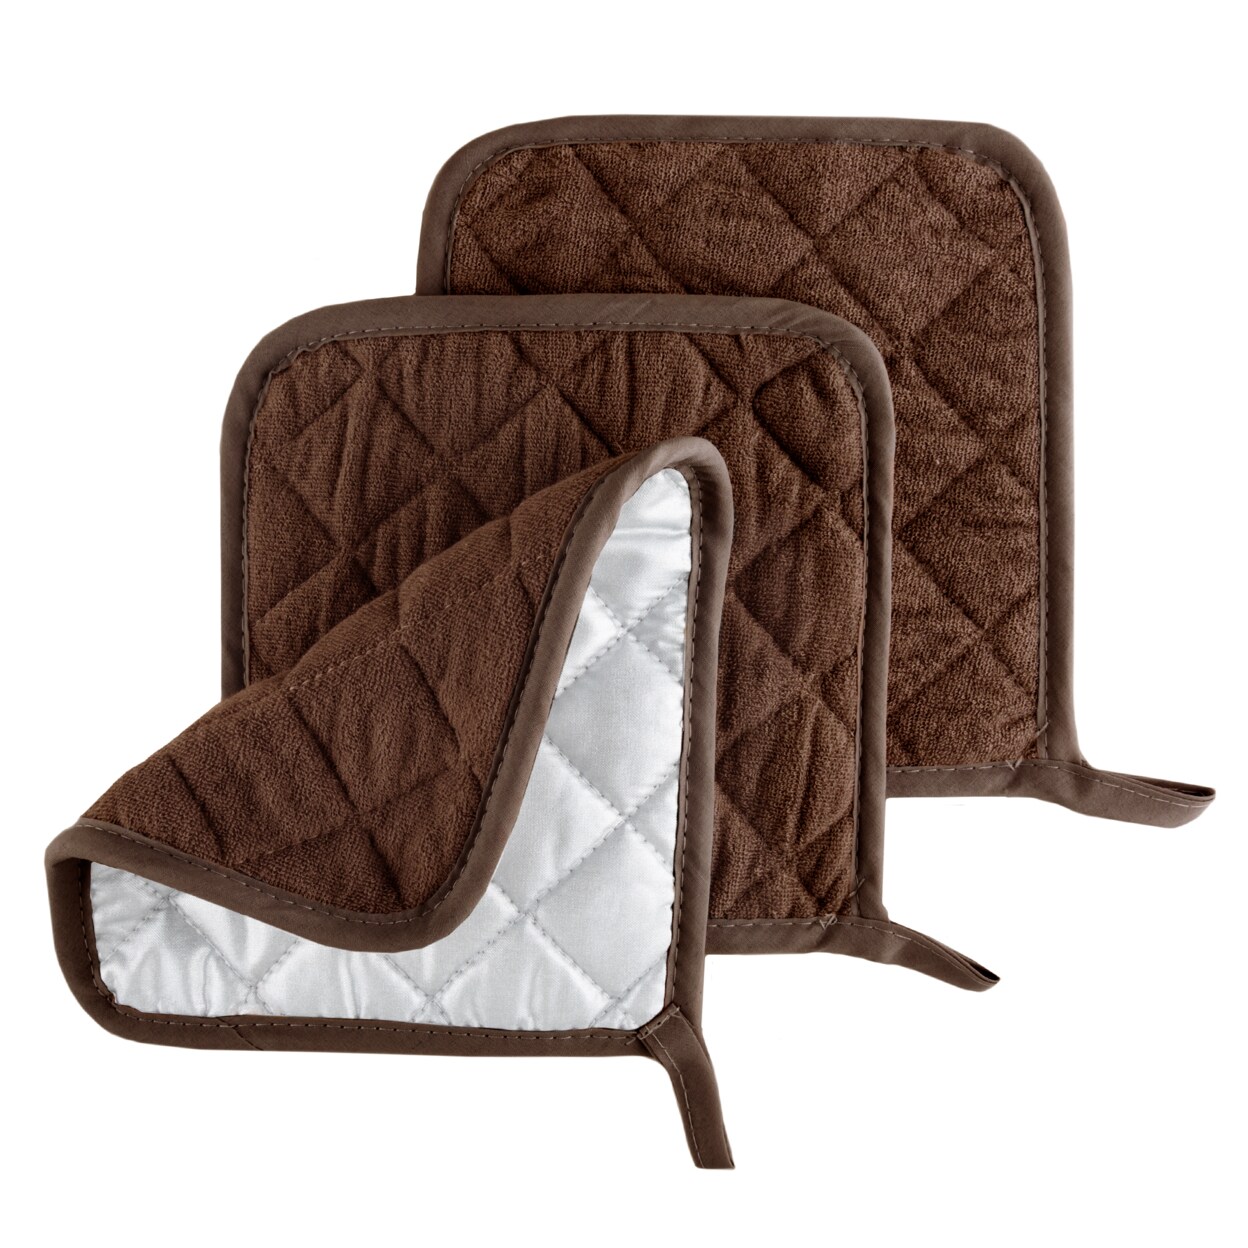 Oven Mitt and Pot Holder Set, Quilted and Flame and Heat Resistant by Lavish Home (Chocolate)